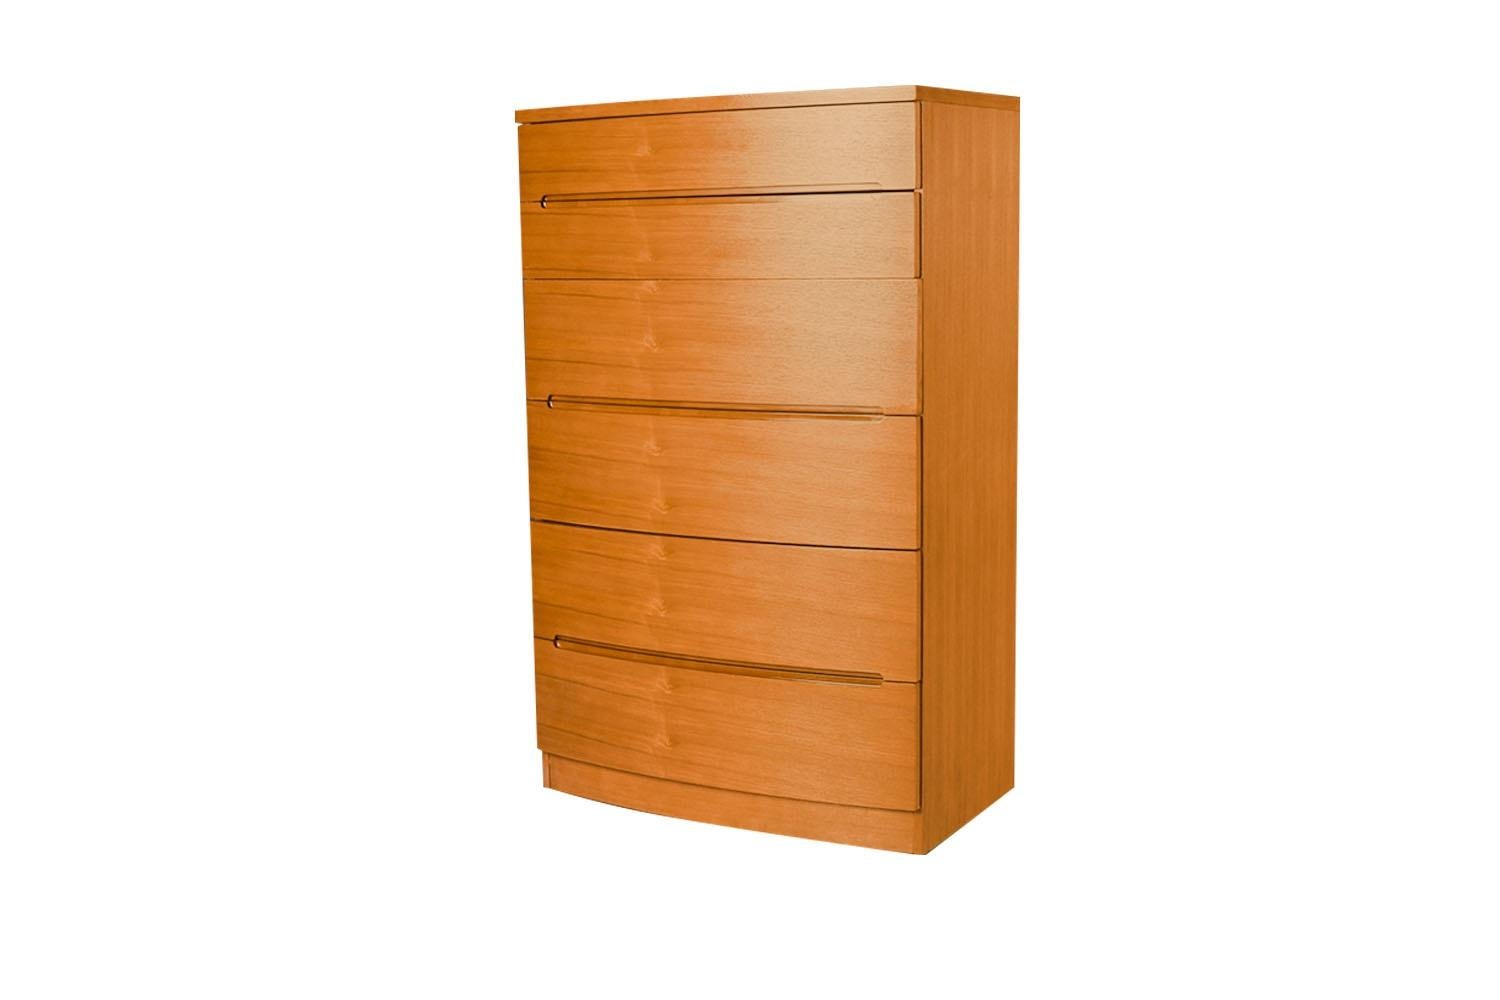 Mid-Century Modern teak high boy bow front dresser, chest of drawers. Minimalist Danish Modern inspired profile and extremely well-made dresser, has incredible lines and detailing. Stunning wood grain high boy dresser accented with sculpted teak